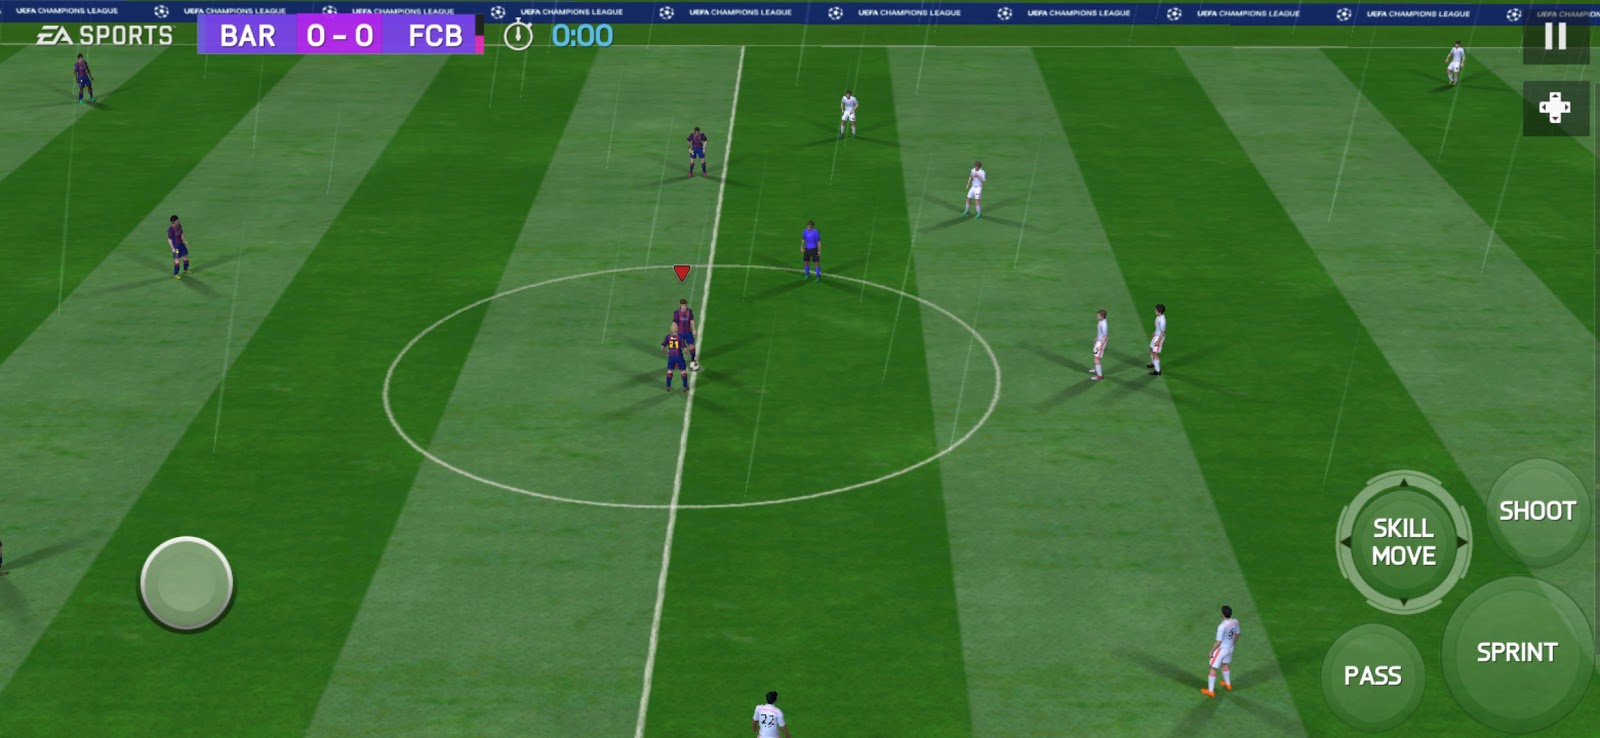 FIFA 21 APK for Android - Latest Mod & Offline Versions